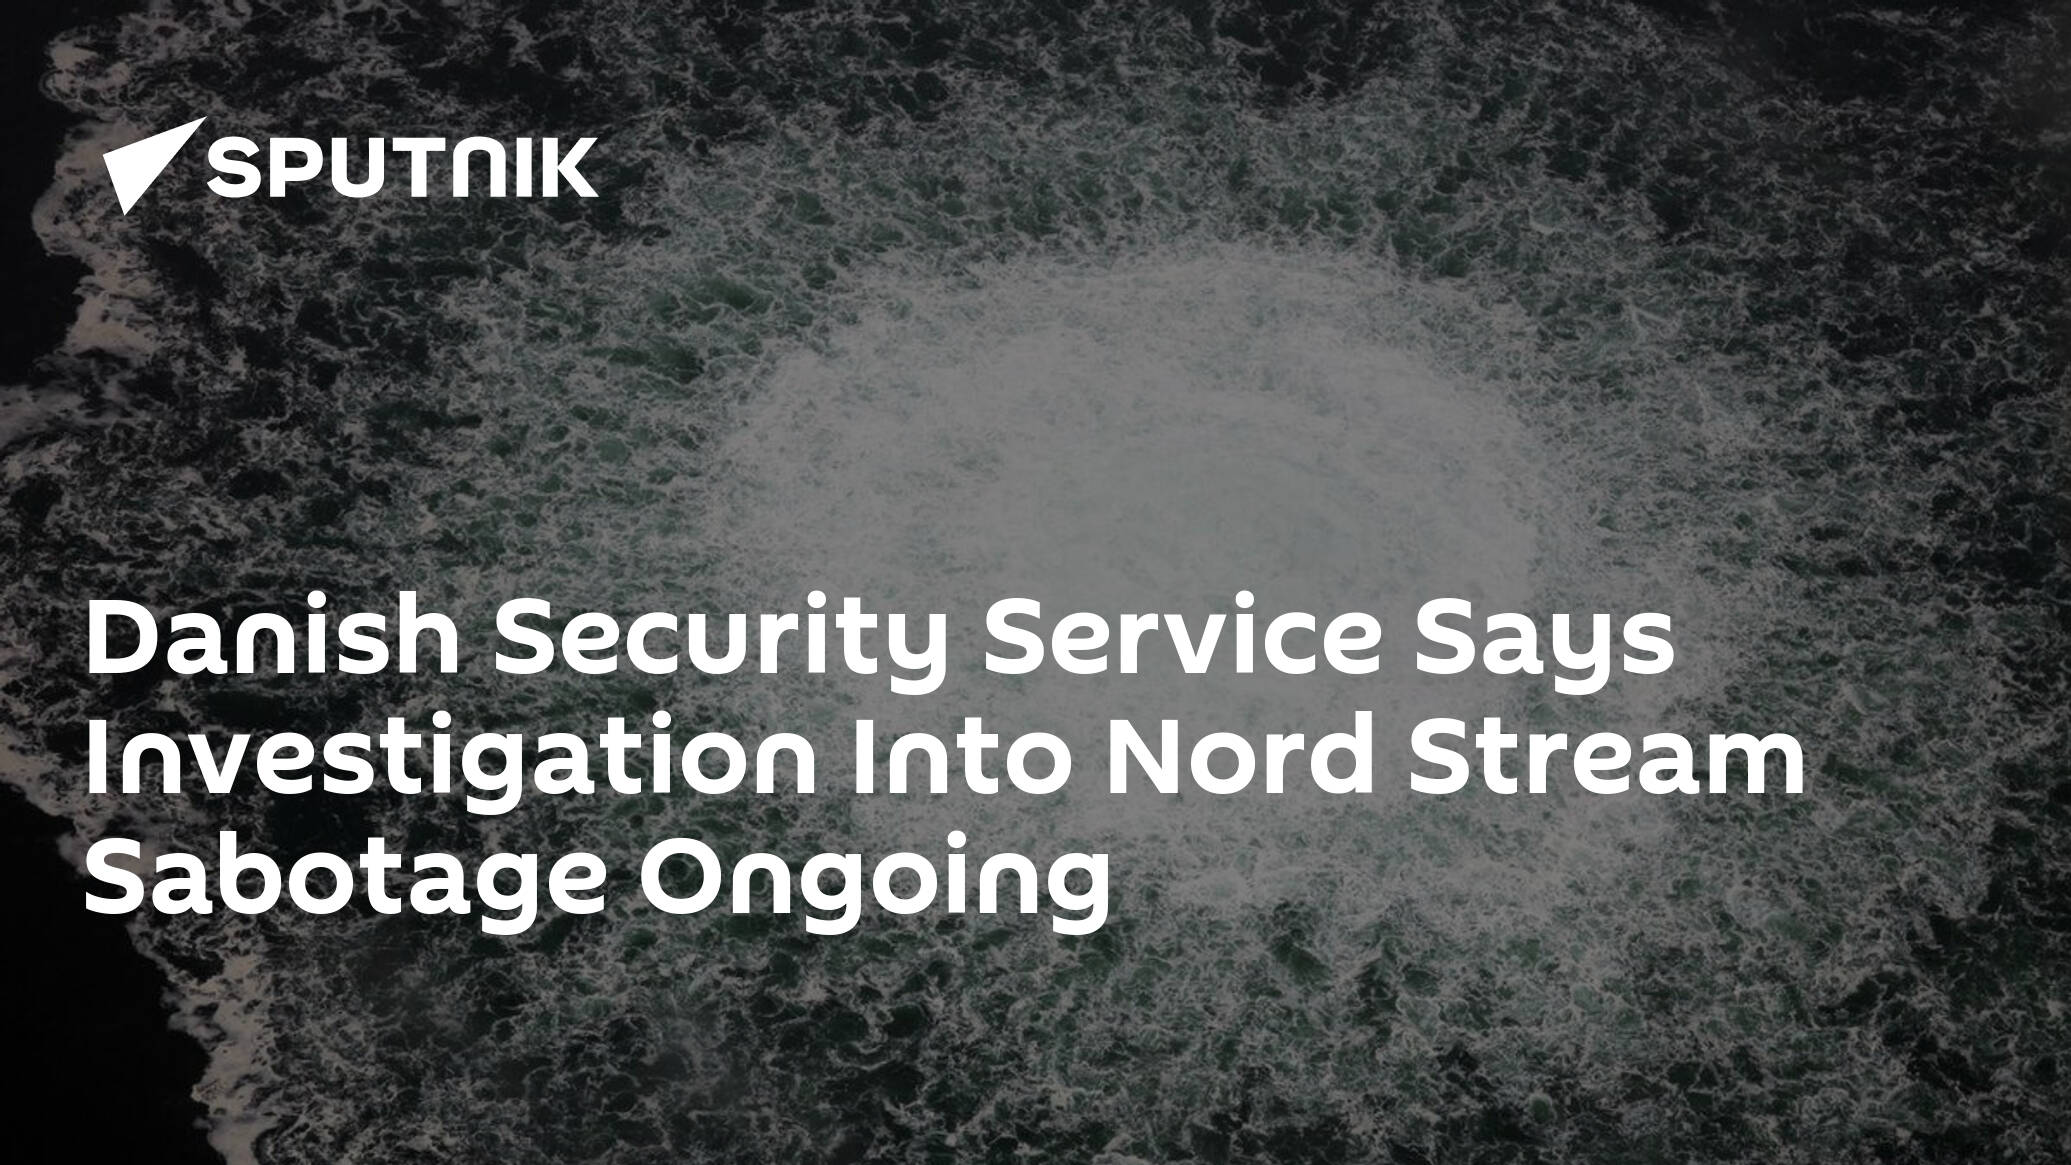 Danish Security Service Says Investigation Into Nord Stream Sabotage Ongoing